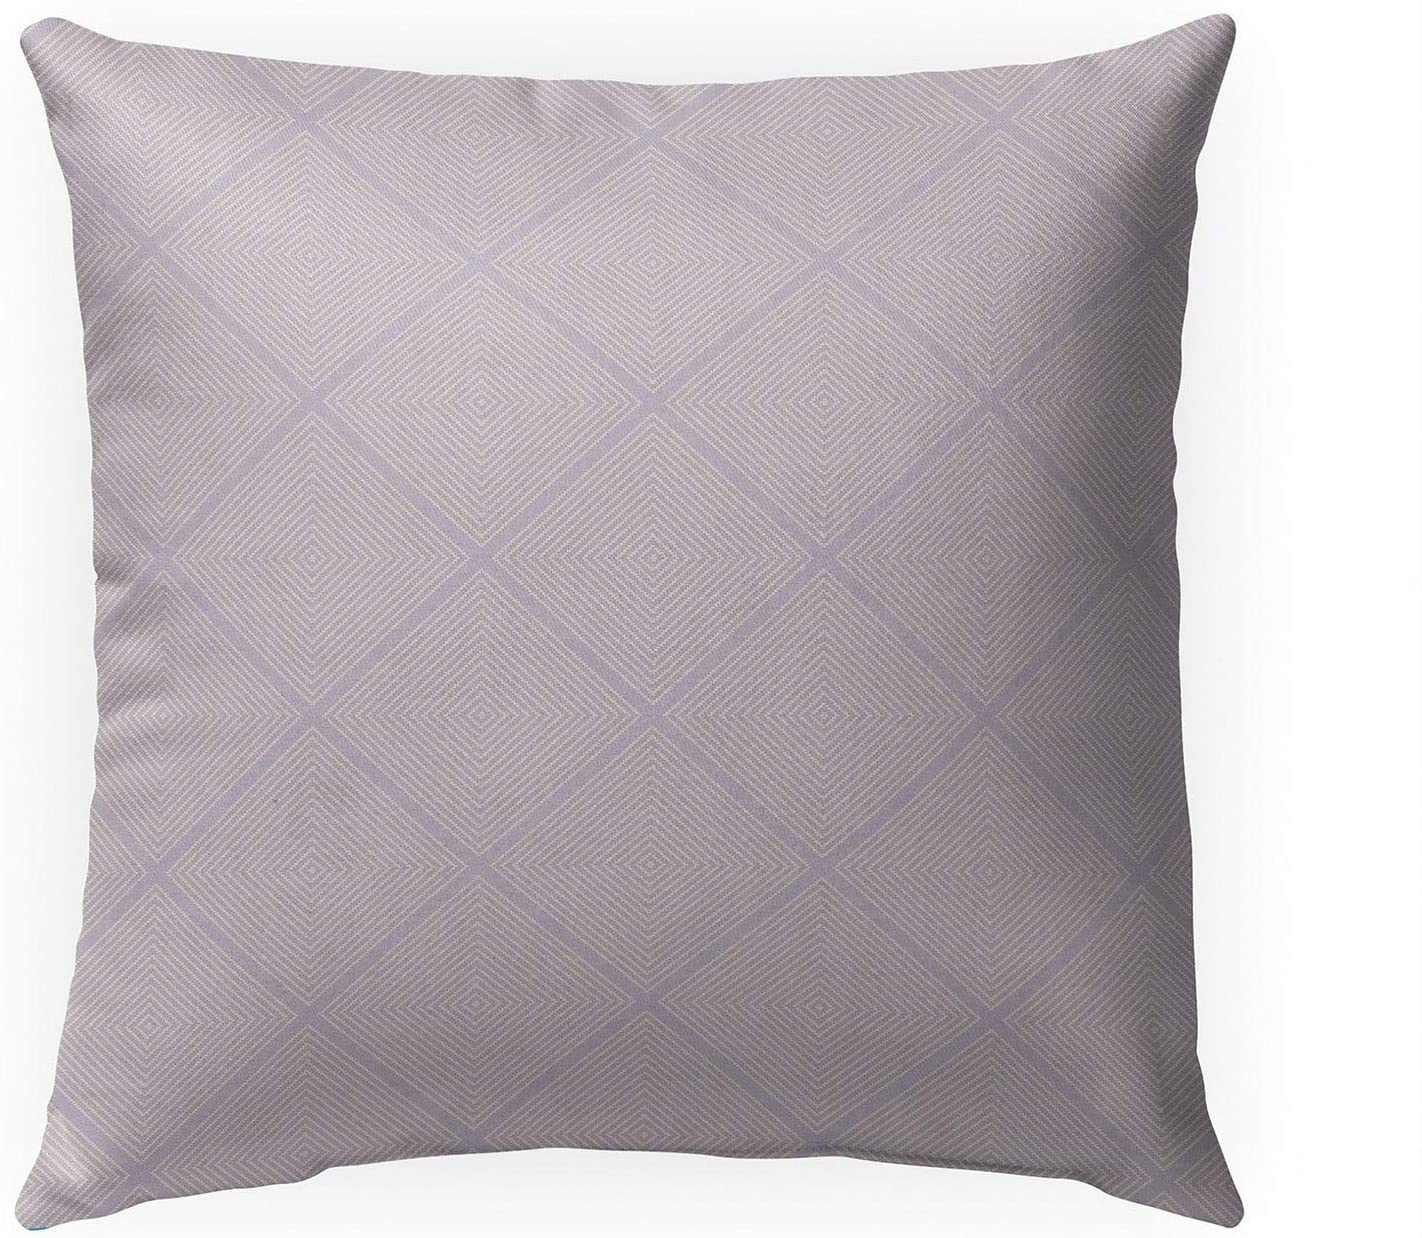 Tribal Diamond Lavender Cream Indoor|Outdoor Pillow by 18x18 Purple Geometric Modern Contemporary Polyester Removable Cover